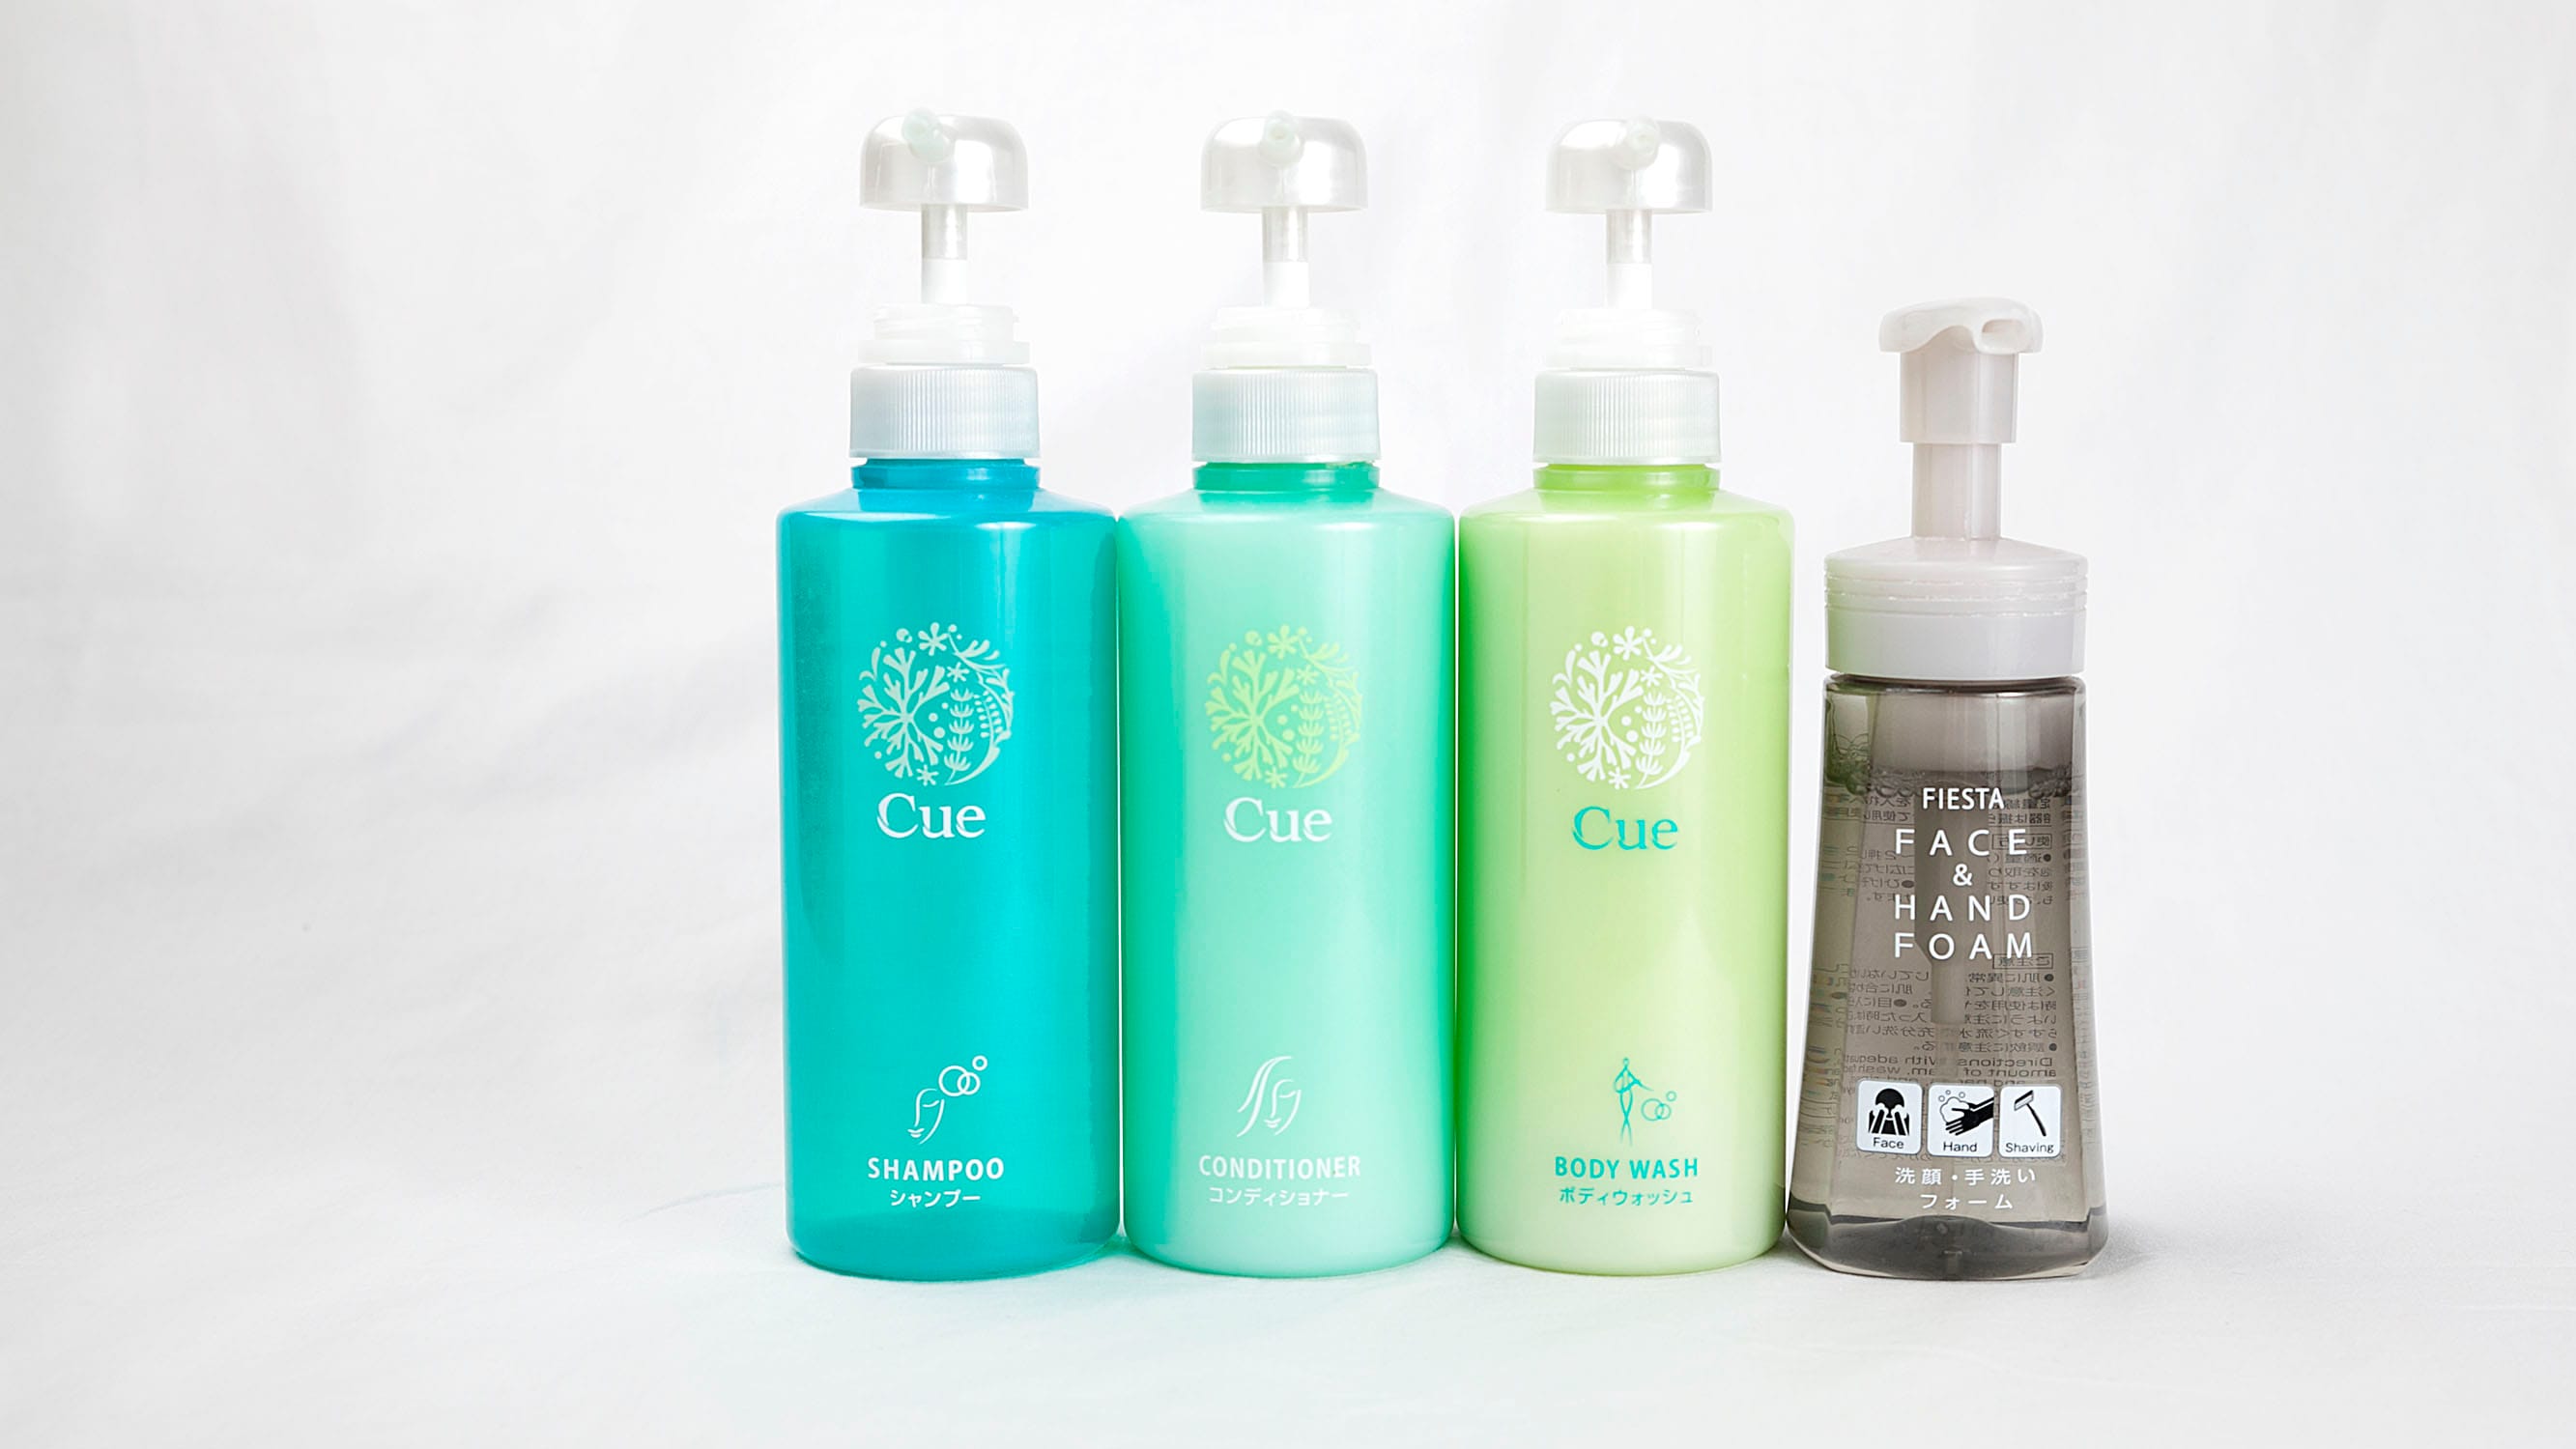 [All rooms are equipped] Shampoo, conditioner, body soap, face wash foam